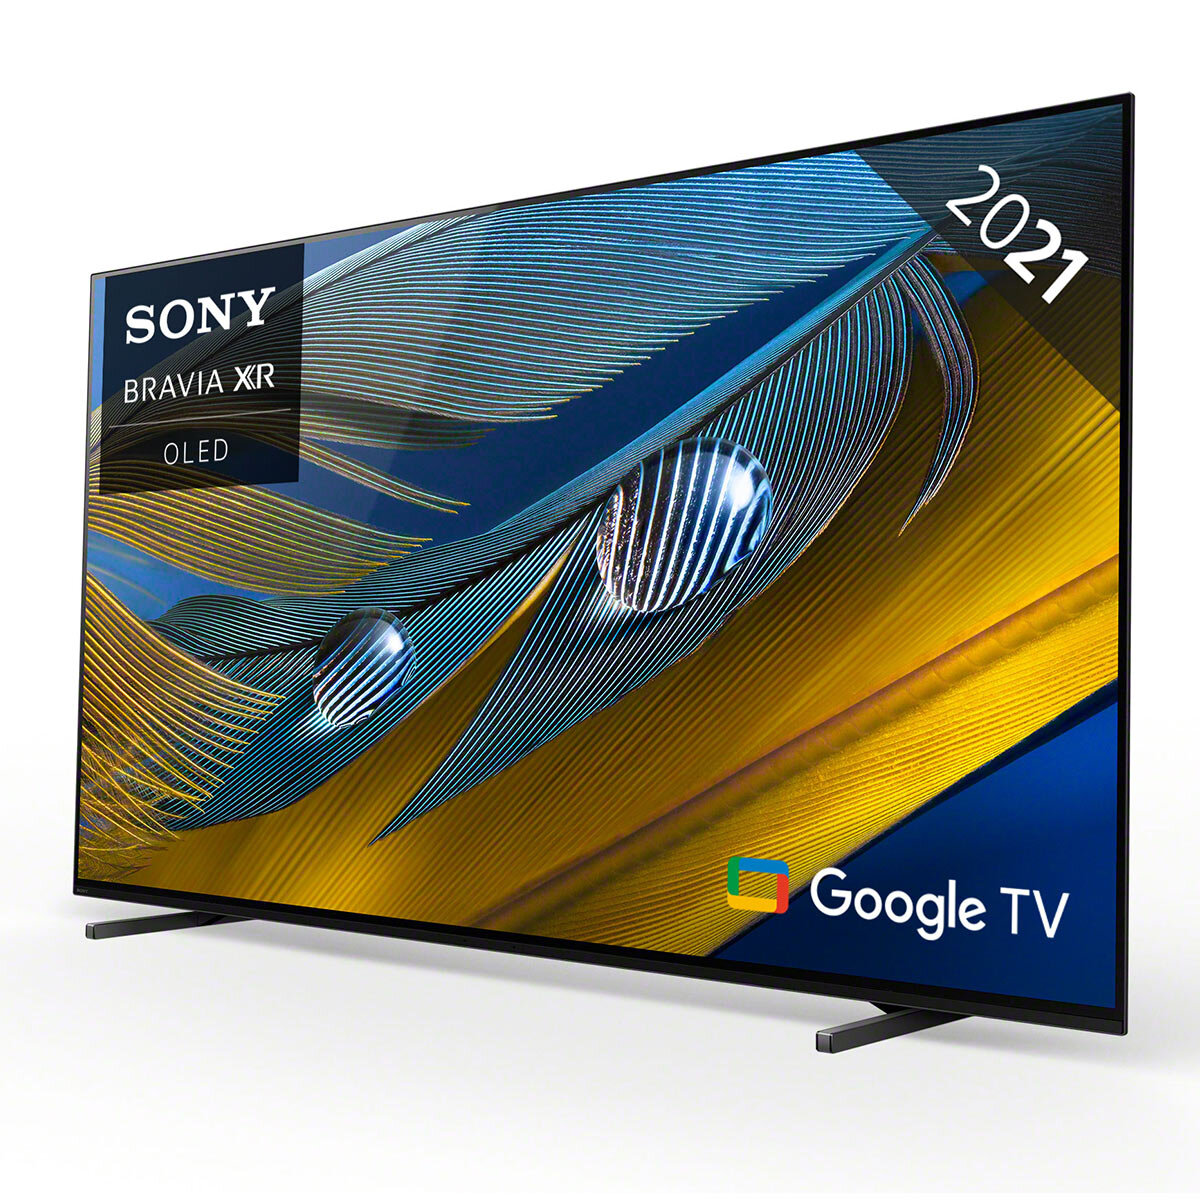 Buy Sony XR65A80JU 65 Inch OLED 4K Ultra HD Smart Android TV at Costco.co.uk